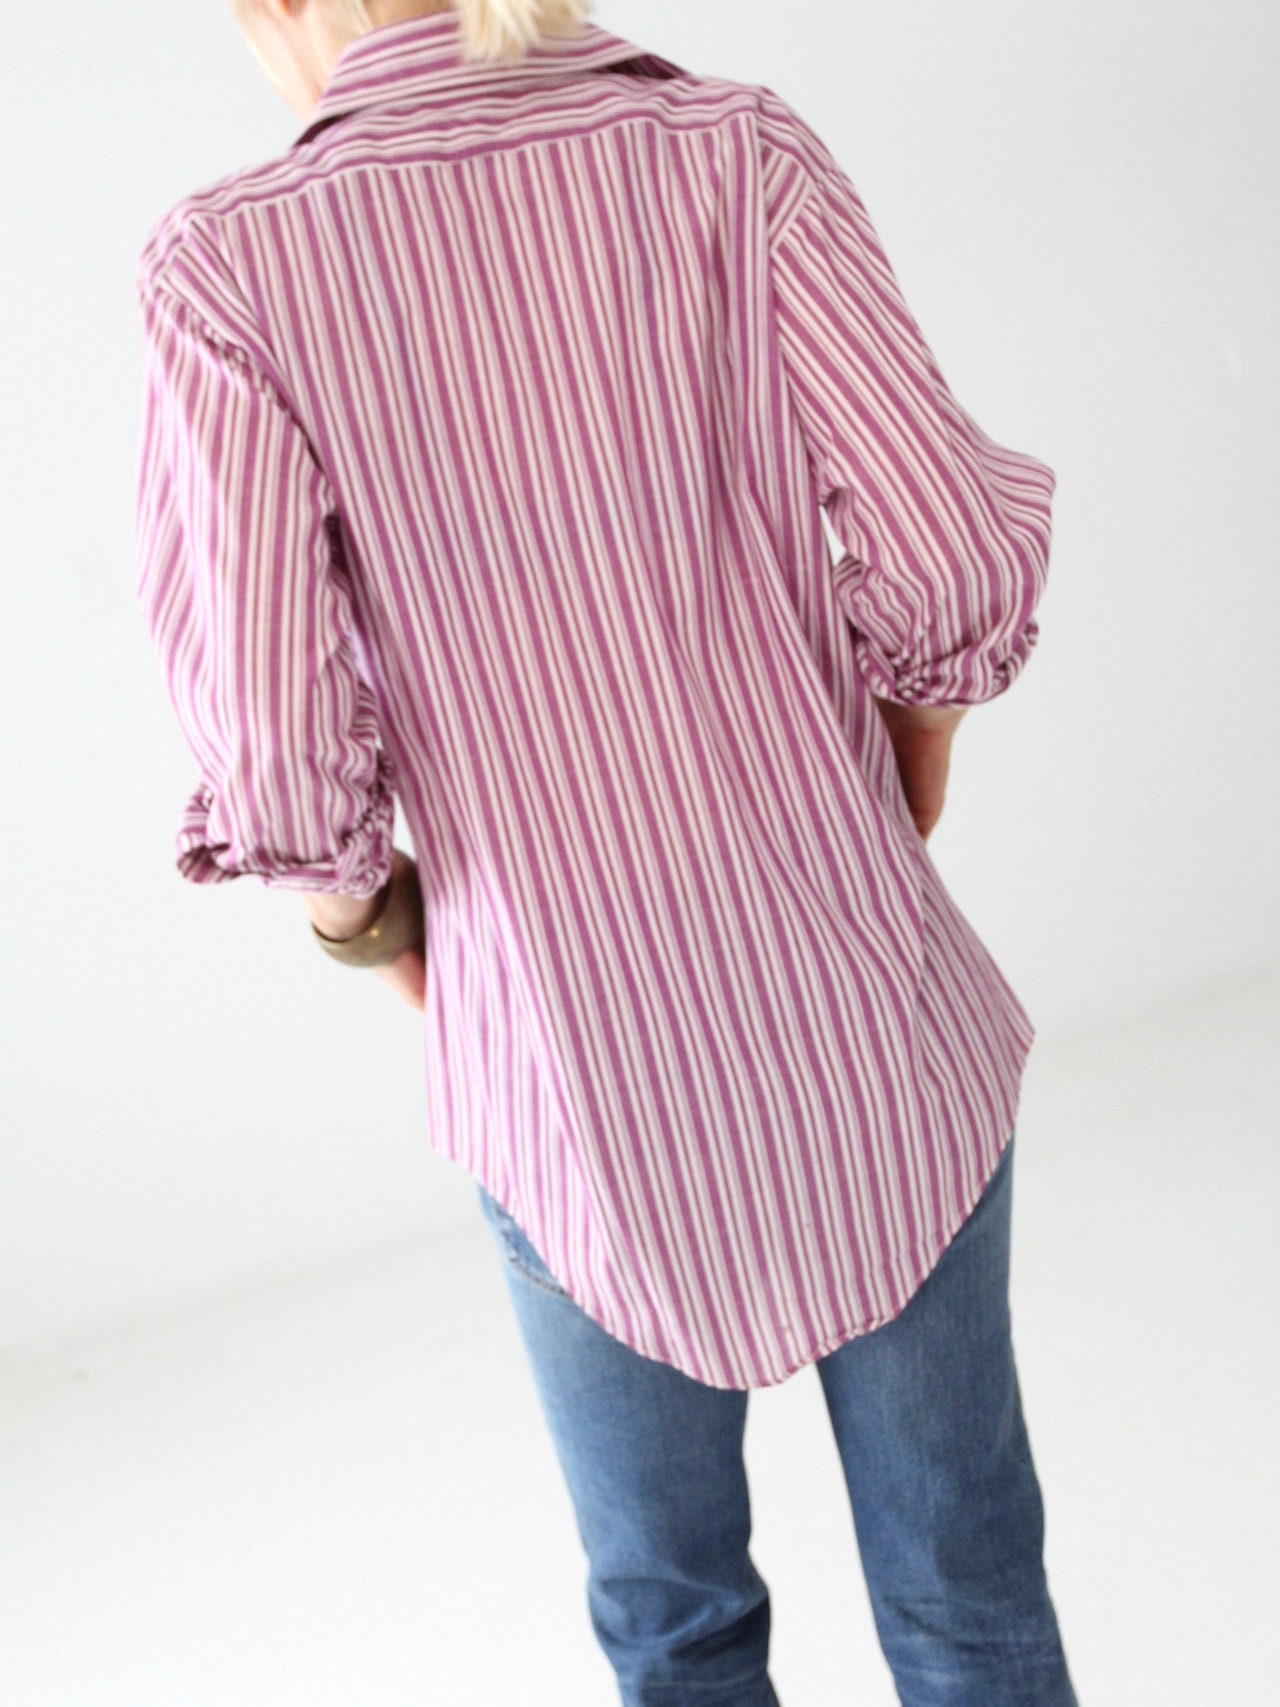 Late 1960s Men's Striped Button Down Jandy Place Barton - Etsy